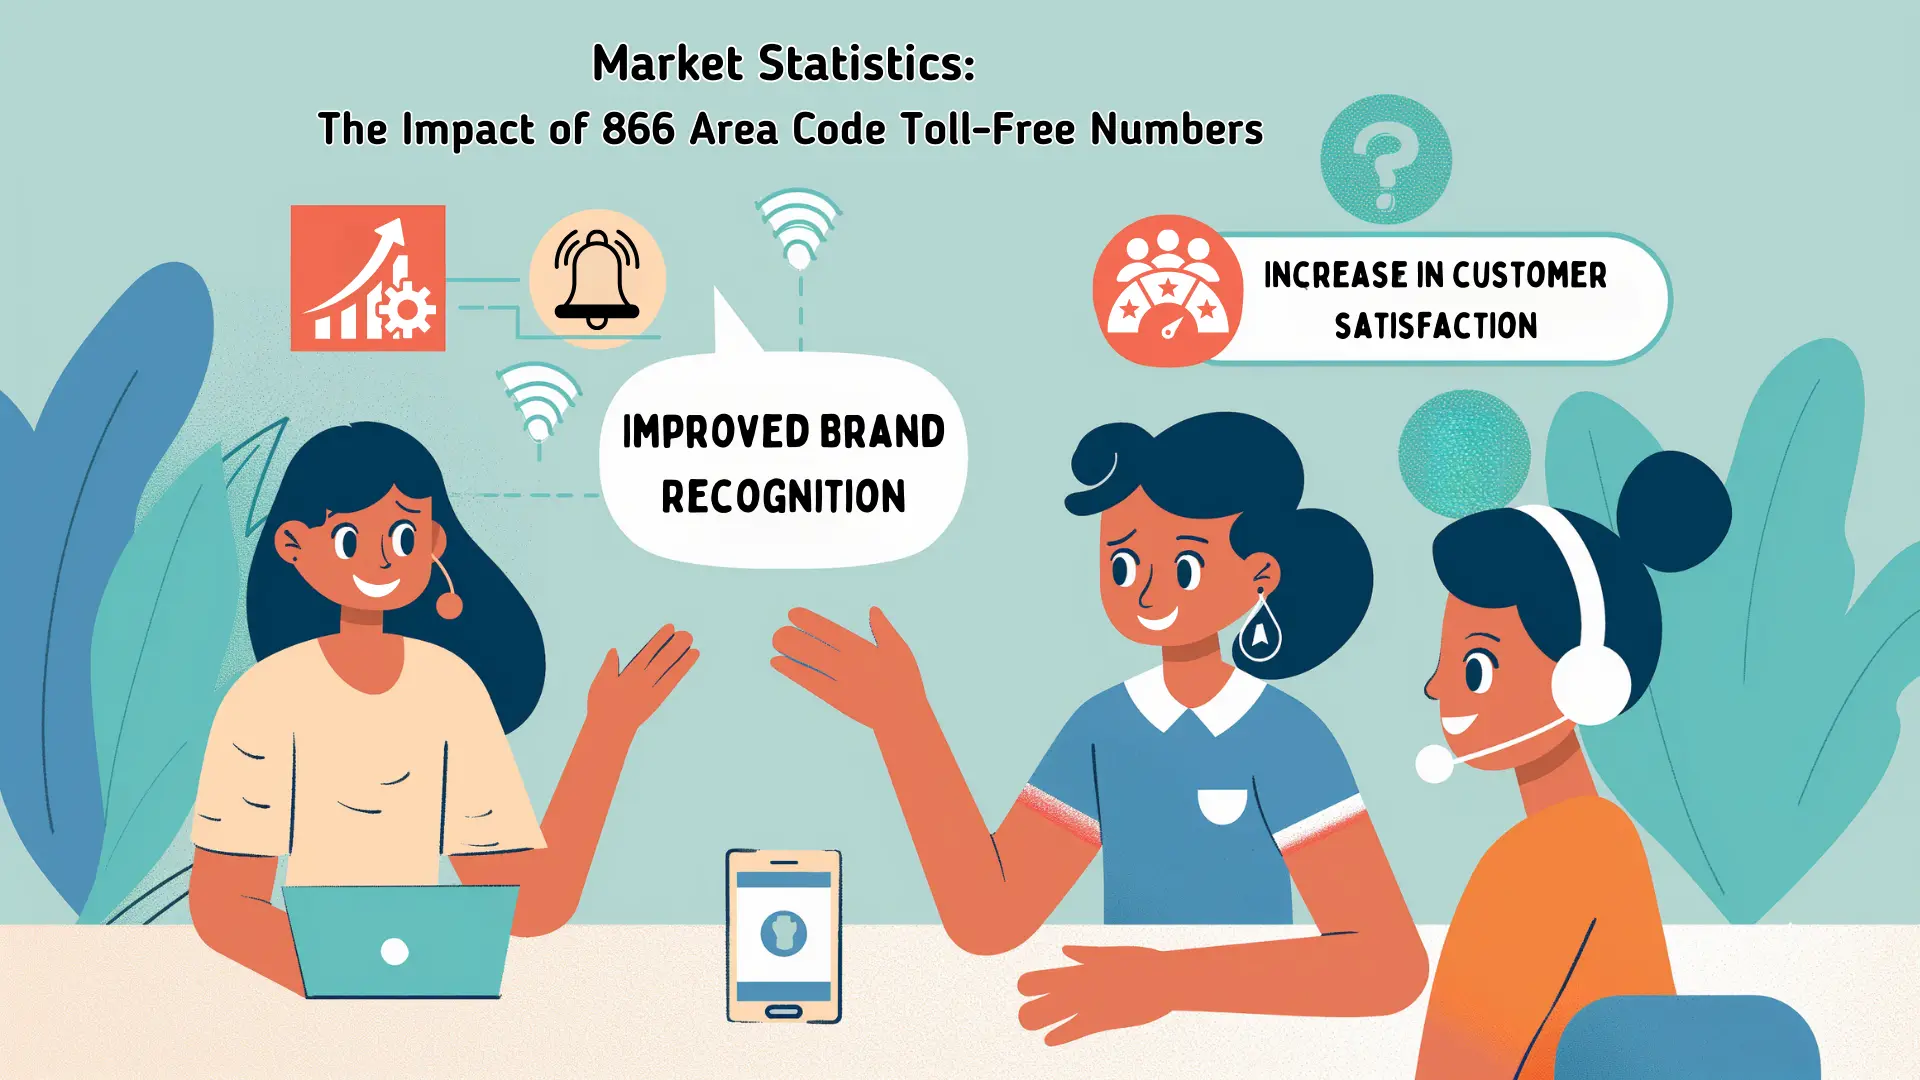 Market Statistics: The Impact of 866 Area Code Toll-Free Numbers
